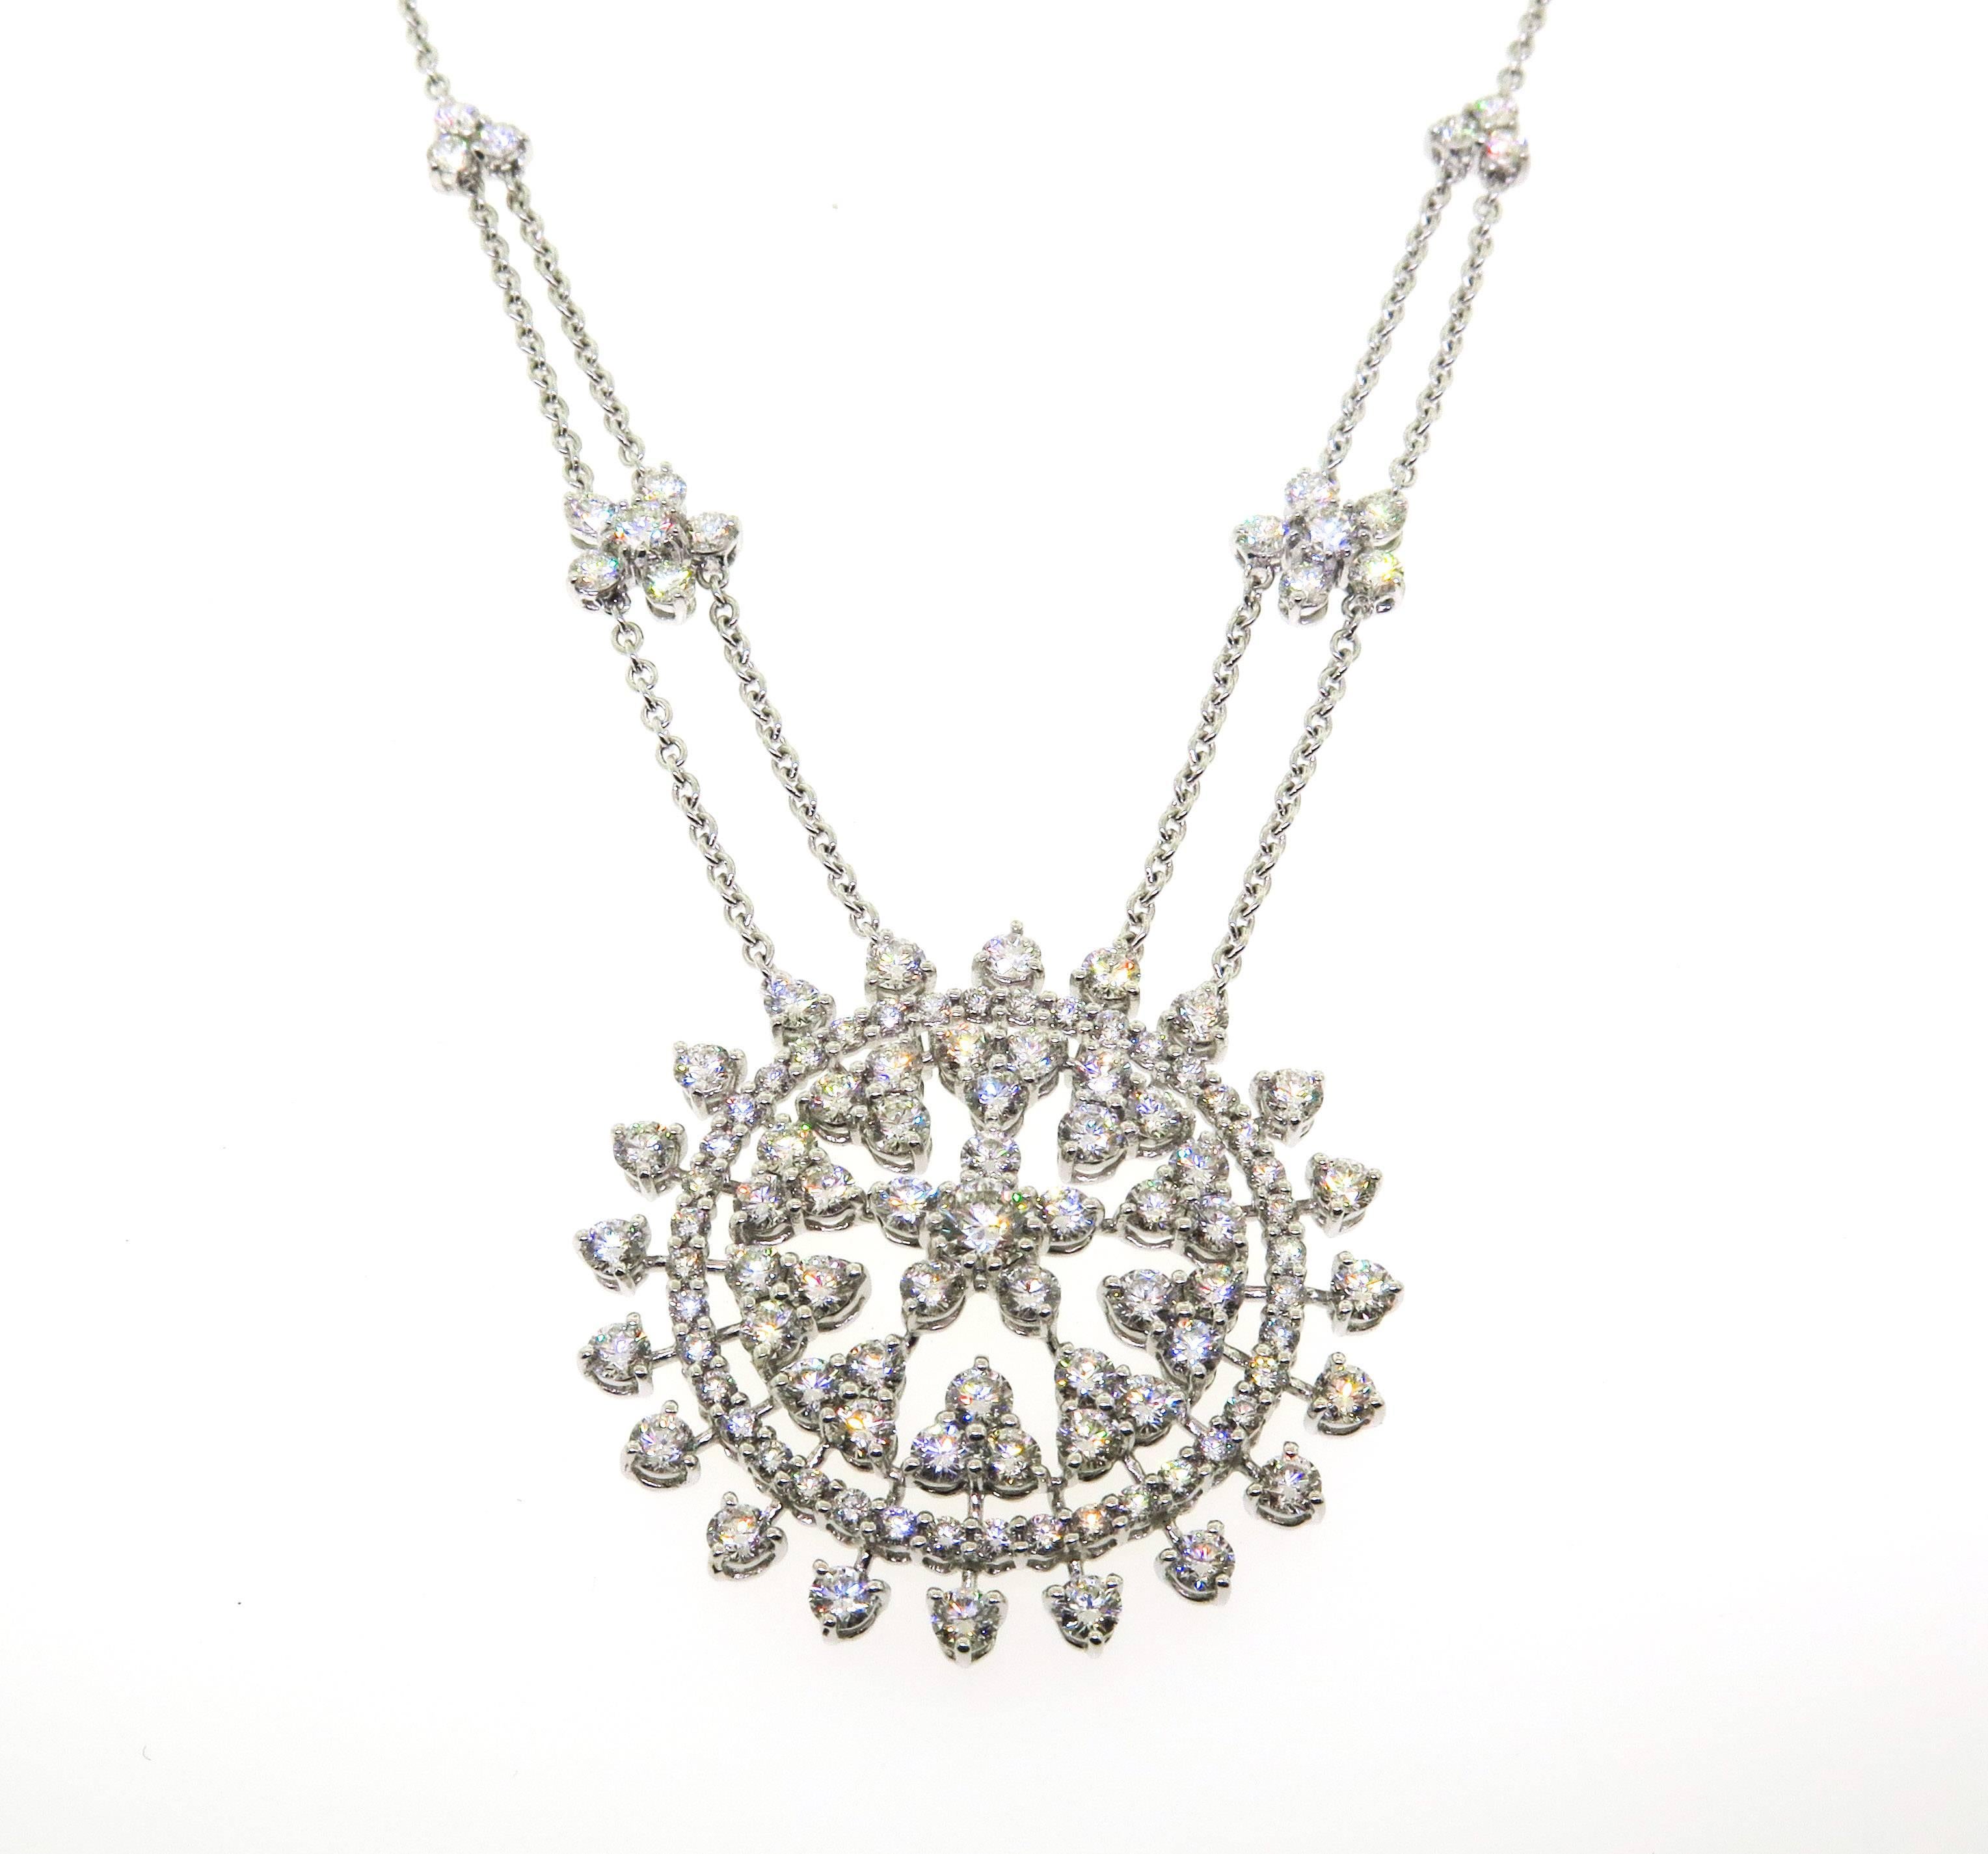 Elegant pendant containing 13.94 ctw of brilliant cut diamonds prong set in 18kt white gold. Features a stunning round center cluster of diamonds arranged in a open floral pattern . This pendant fully illustrates the exceptional workmanship of fine